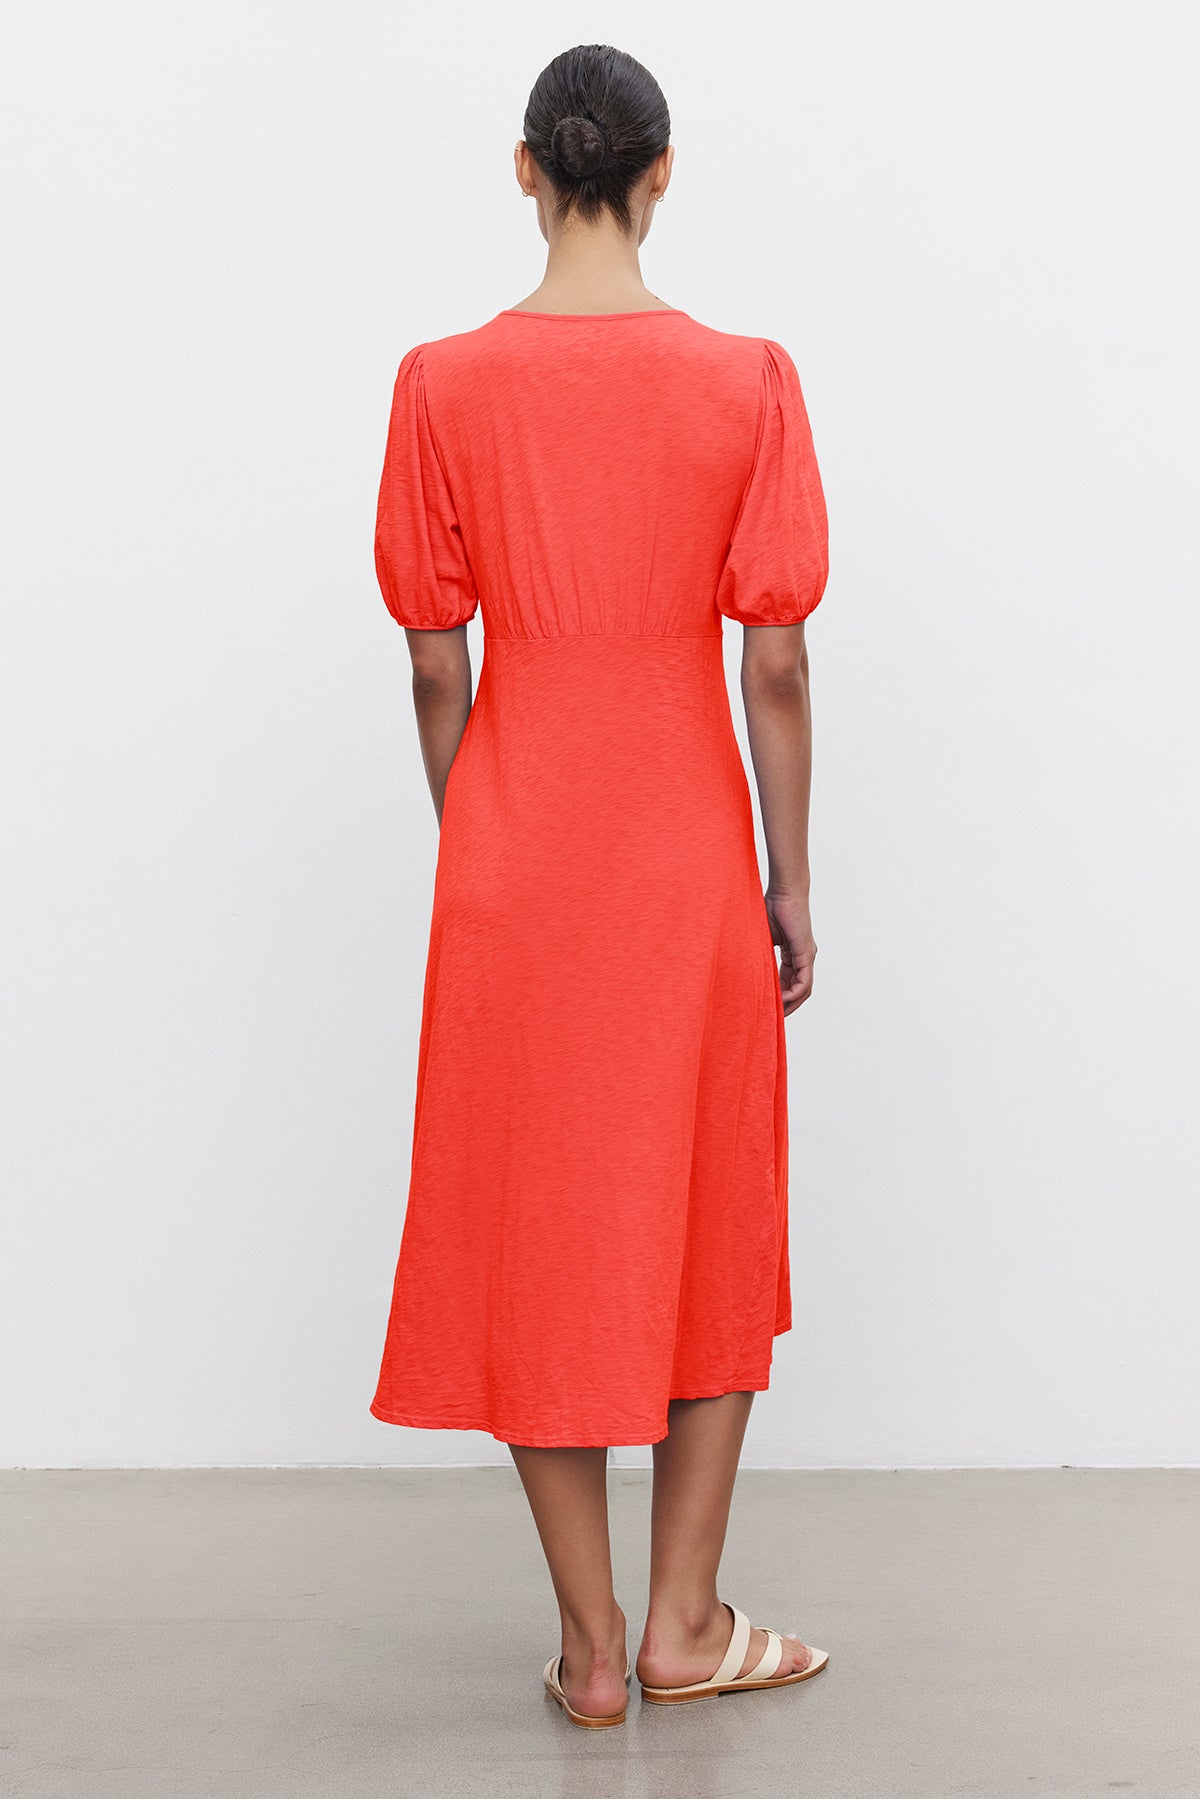   A person with hair in a bun, wearing the PARKER COTTON SLUB MIDI DRESS by Velvet by Graham & Spencer with short puffed sleeves and flat sandals, stands with their back to the camera against a plain white background. 